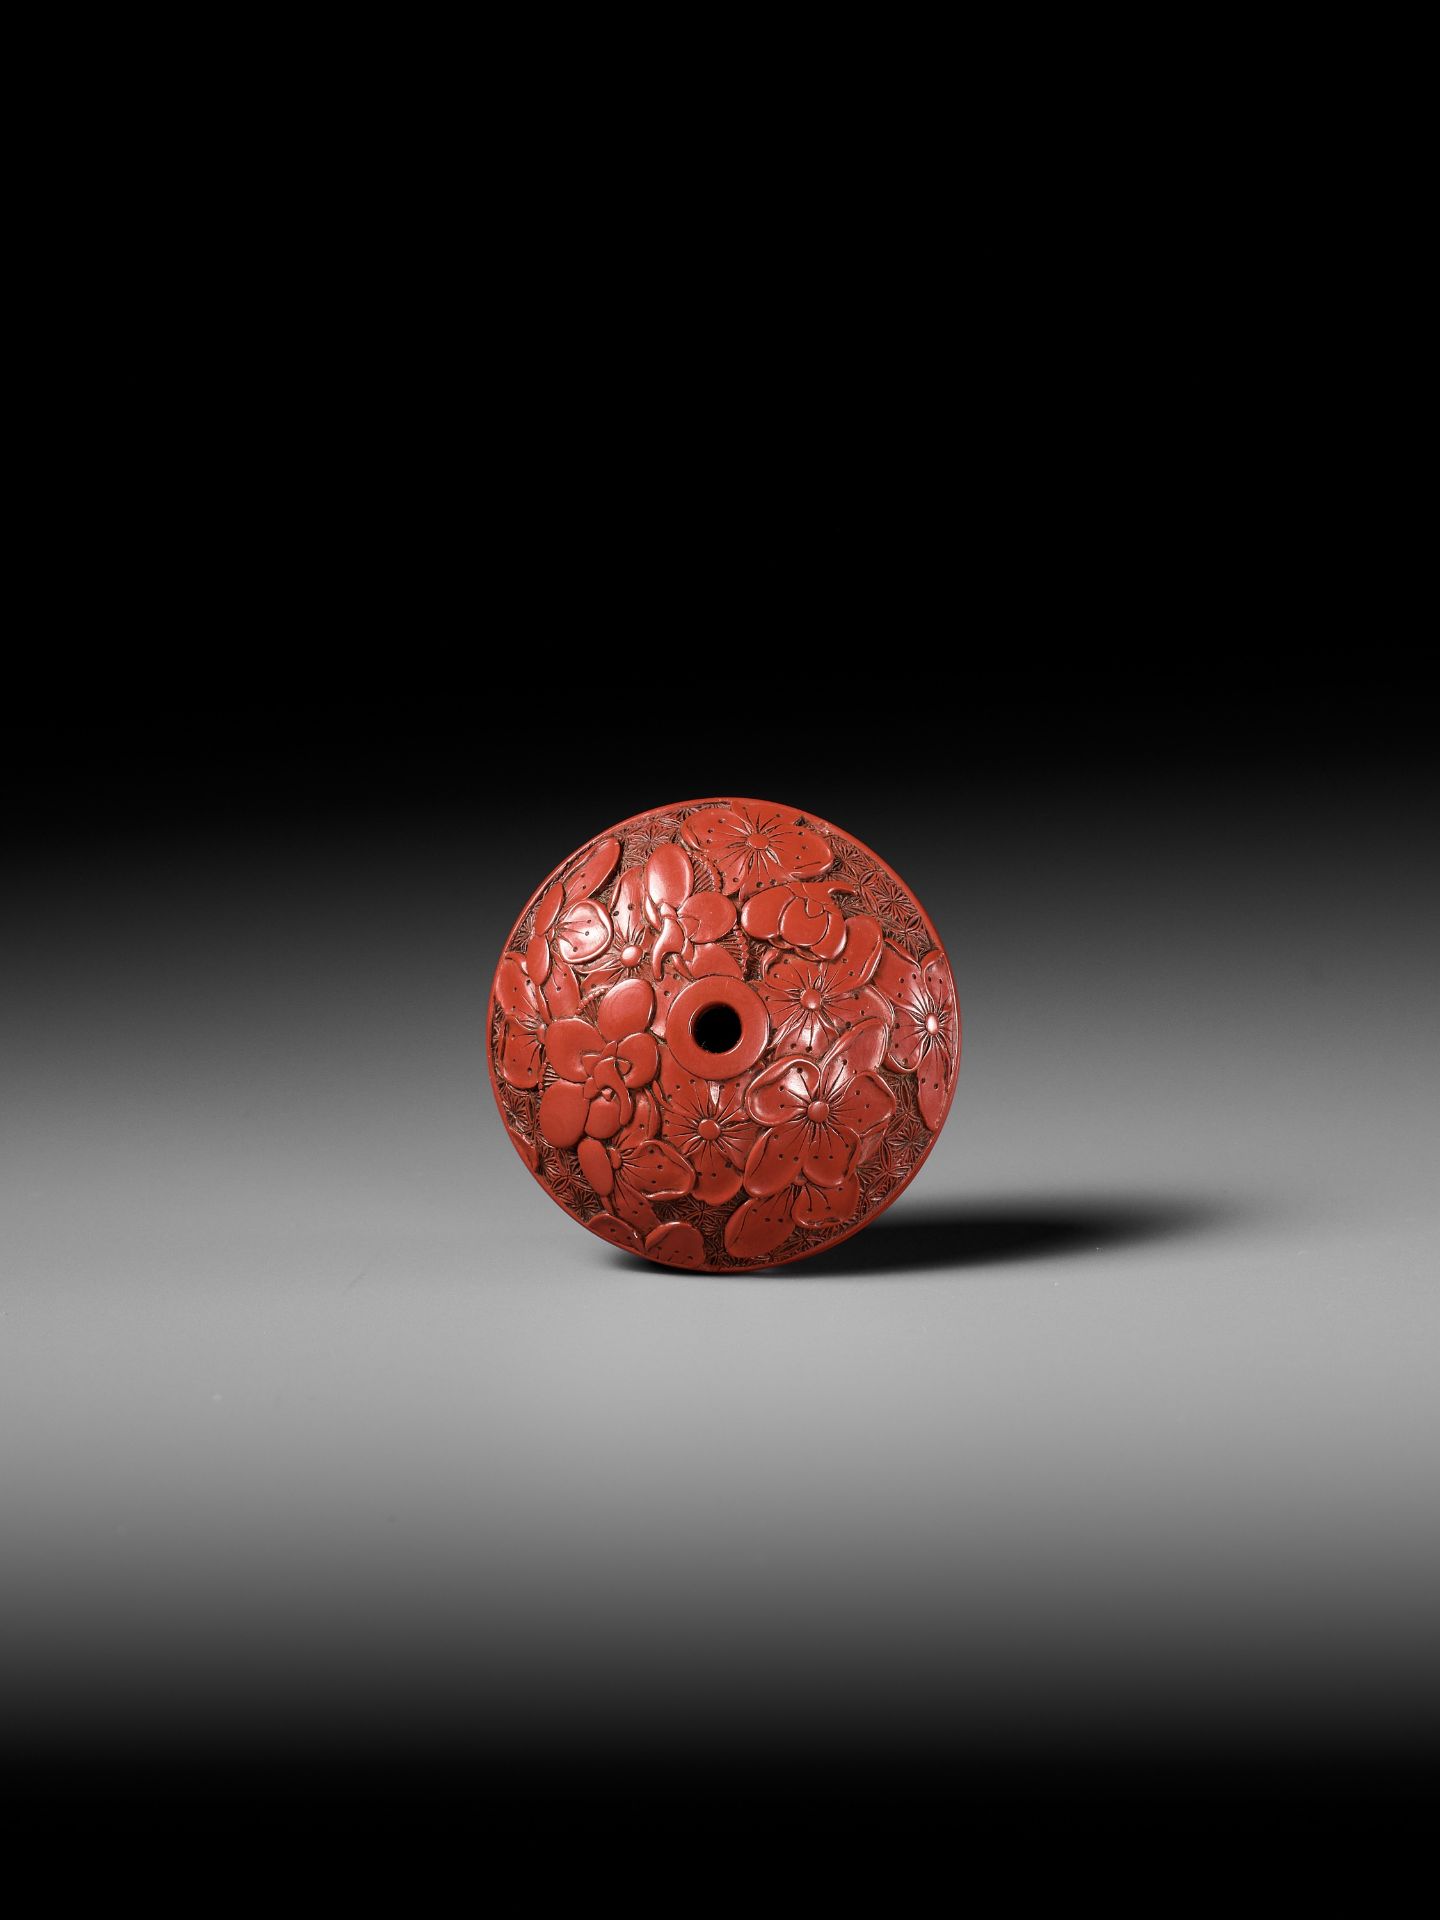 A FINE TSUISHU (CARVED RED LACQUER) MANJU NETSUKE WITH PEACH BLOSSOMS - Image 2 of 13